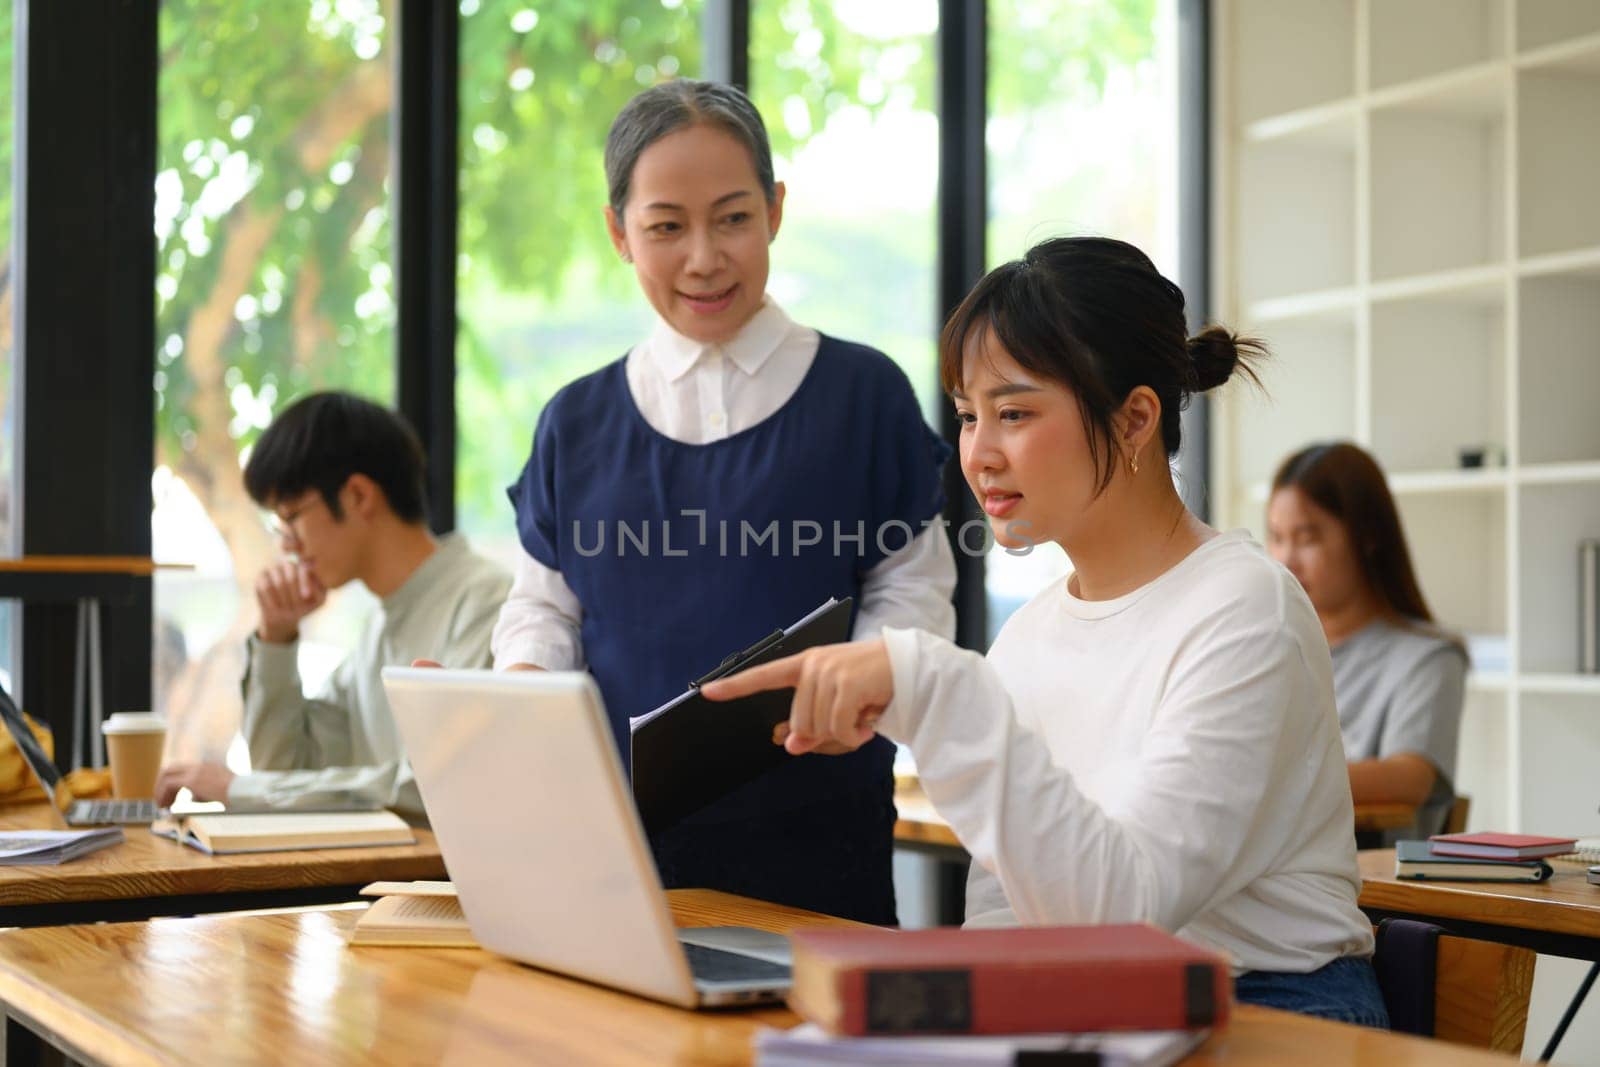 Friendly senior professor helping female student with assignment.